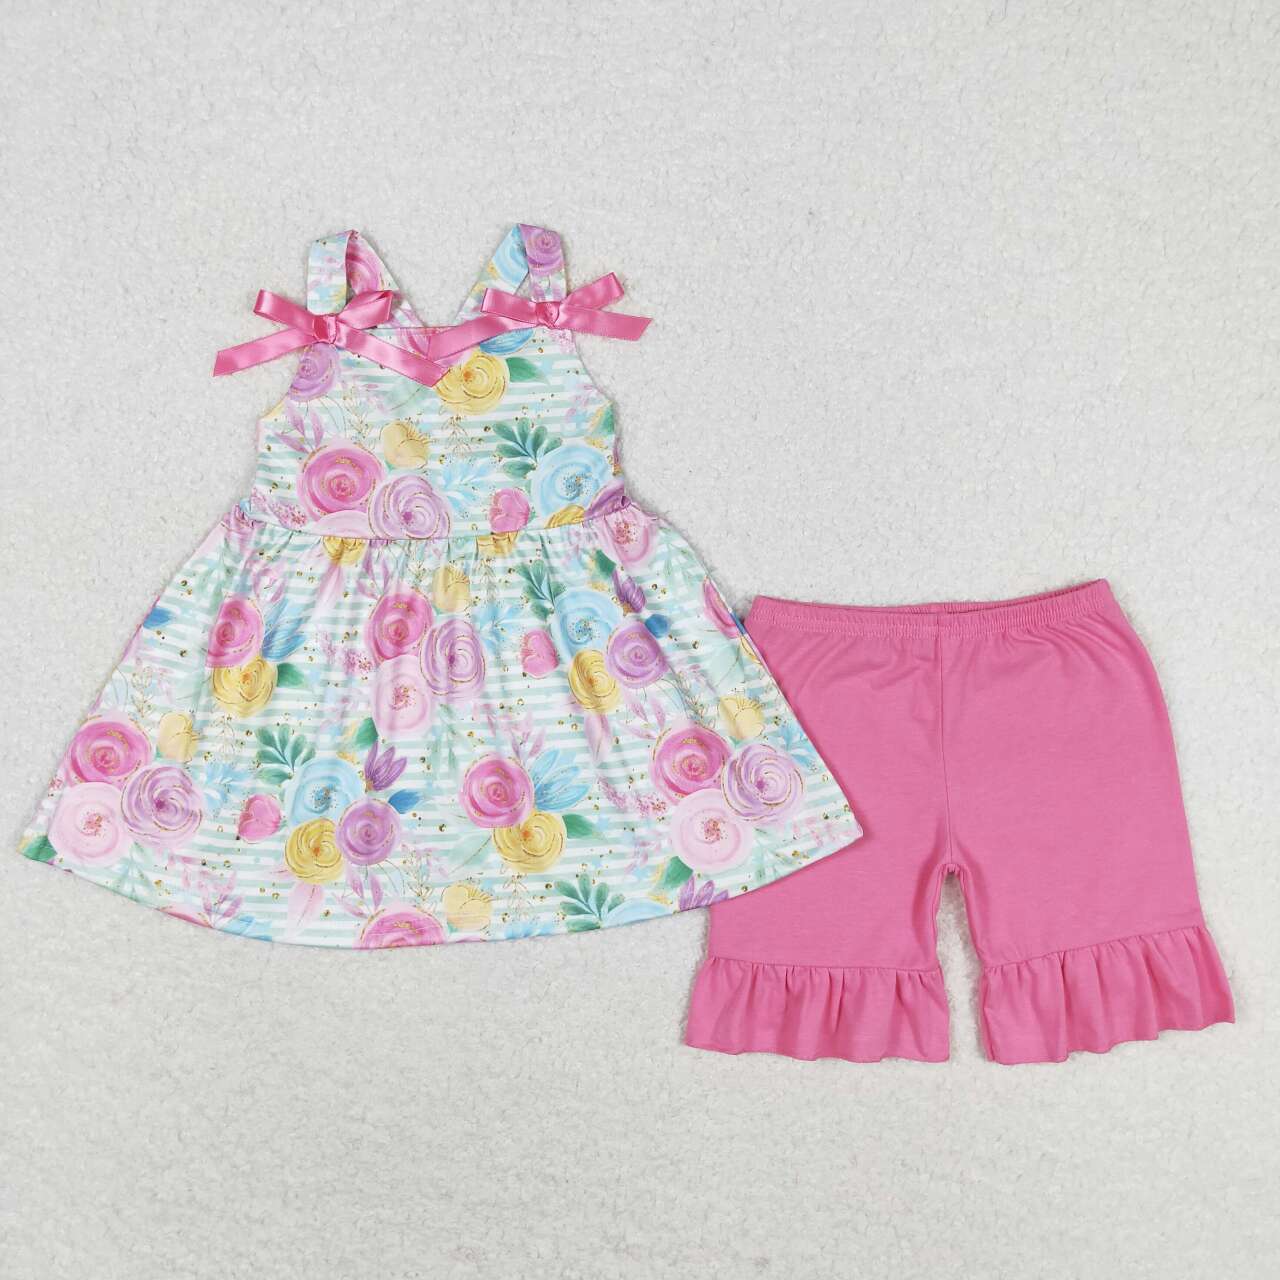 Colorful Flowers Print Sisters Summer Matching Clothes